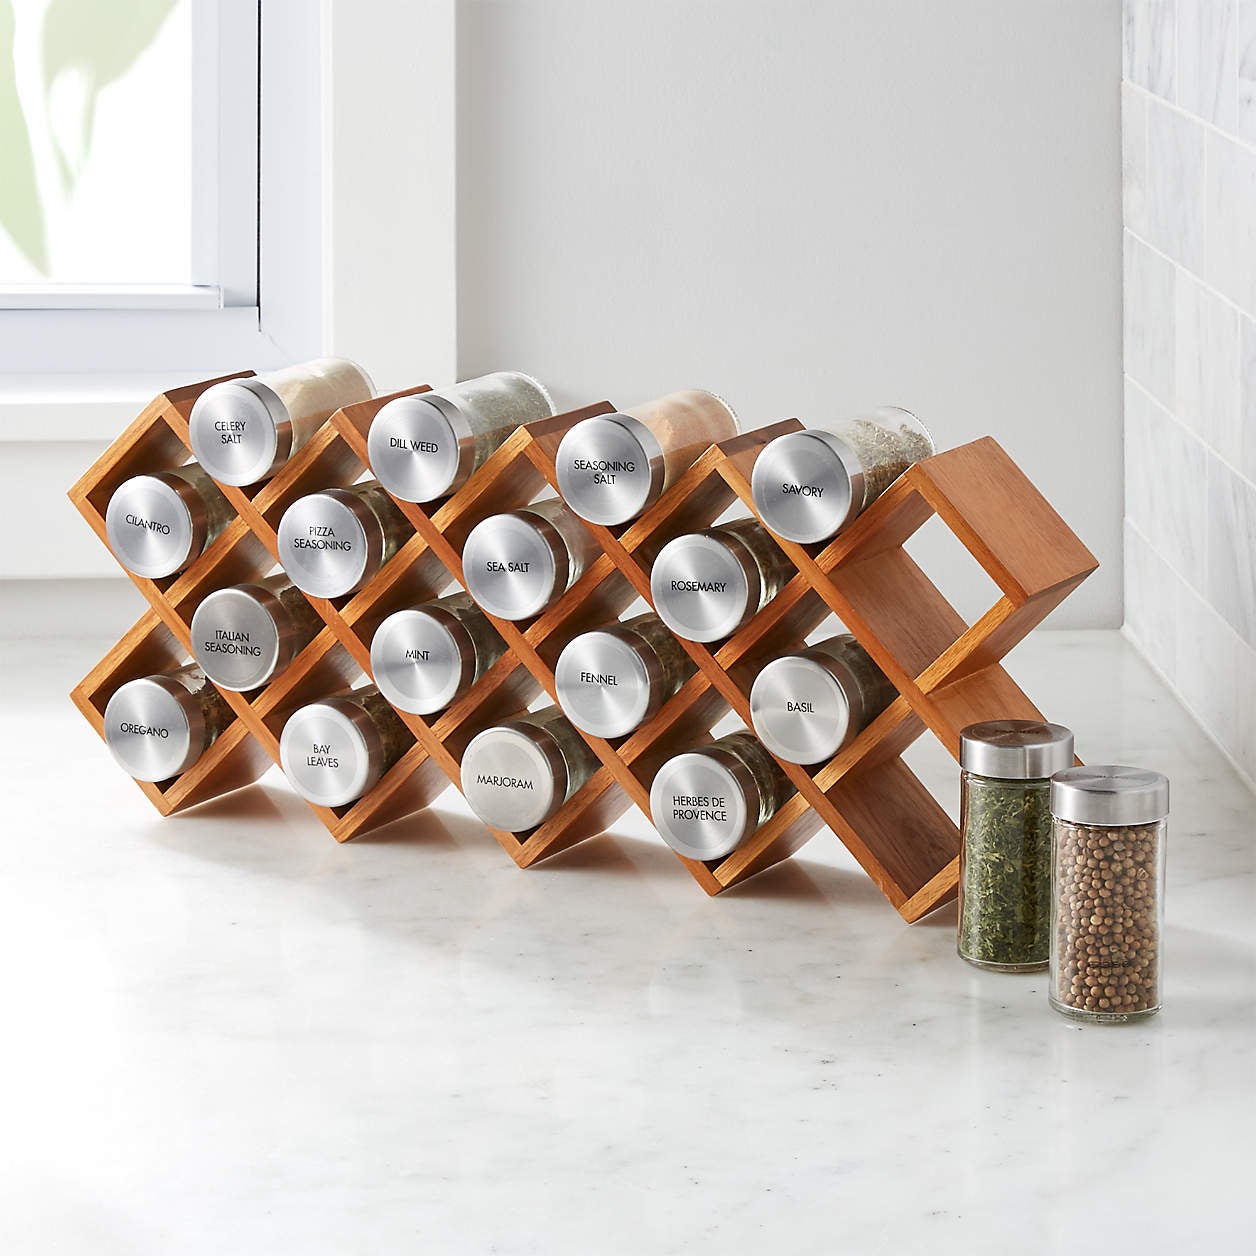 Hone-can-do Flat Wire Expandable Spice Rack - Gray : Target